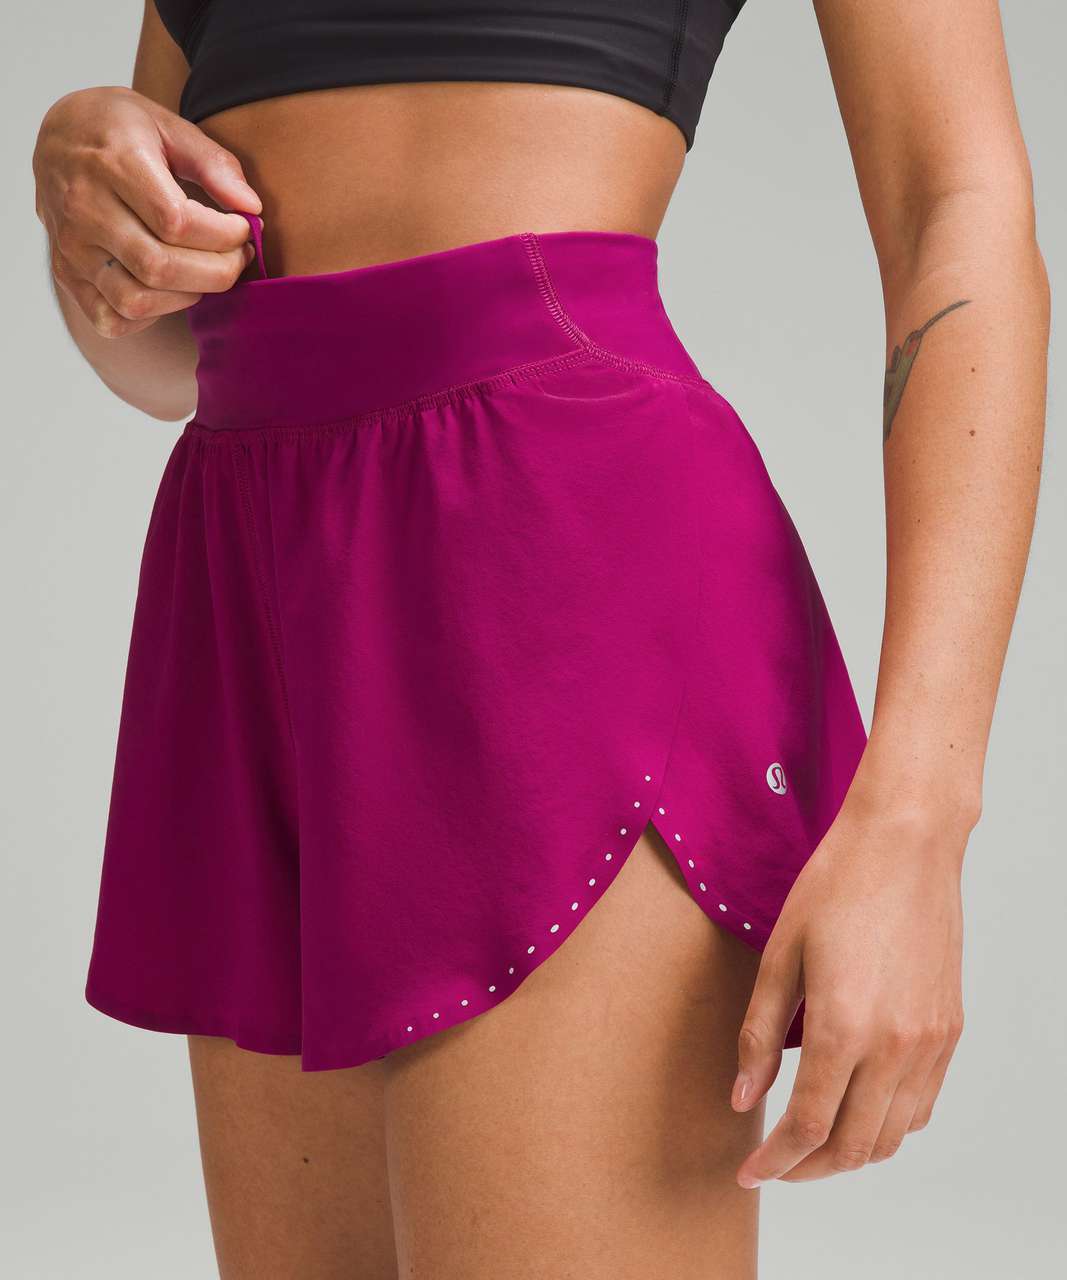 Lululemon Fast and Free Reflective High-Rise Classic-Fit Short 3" - Magenta Purple